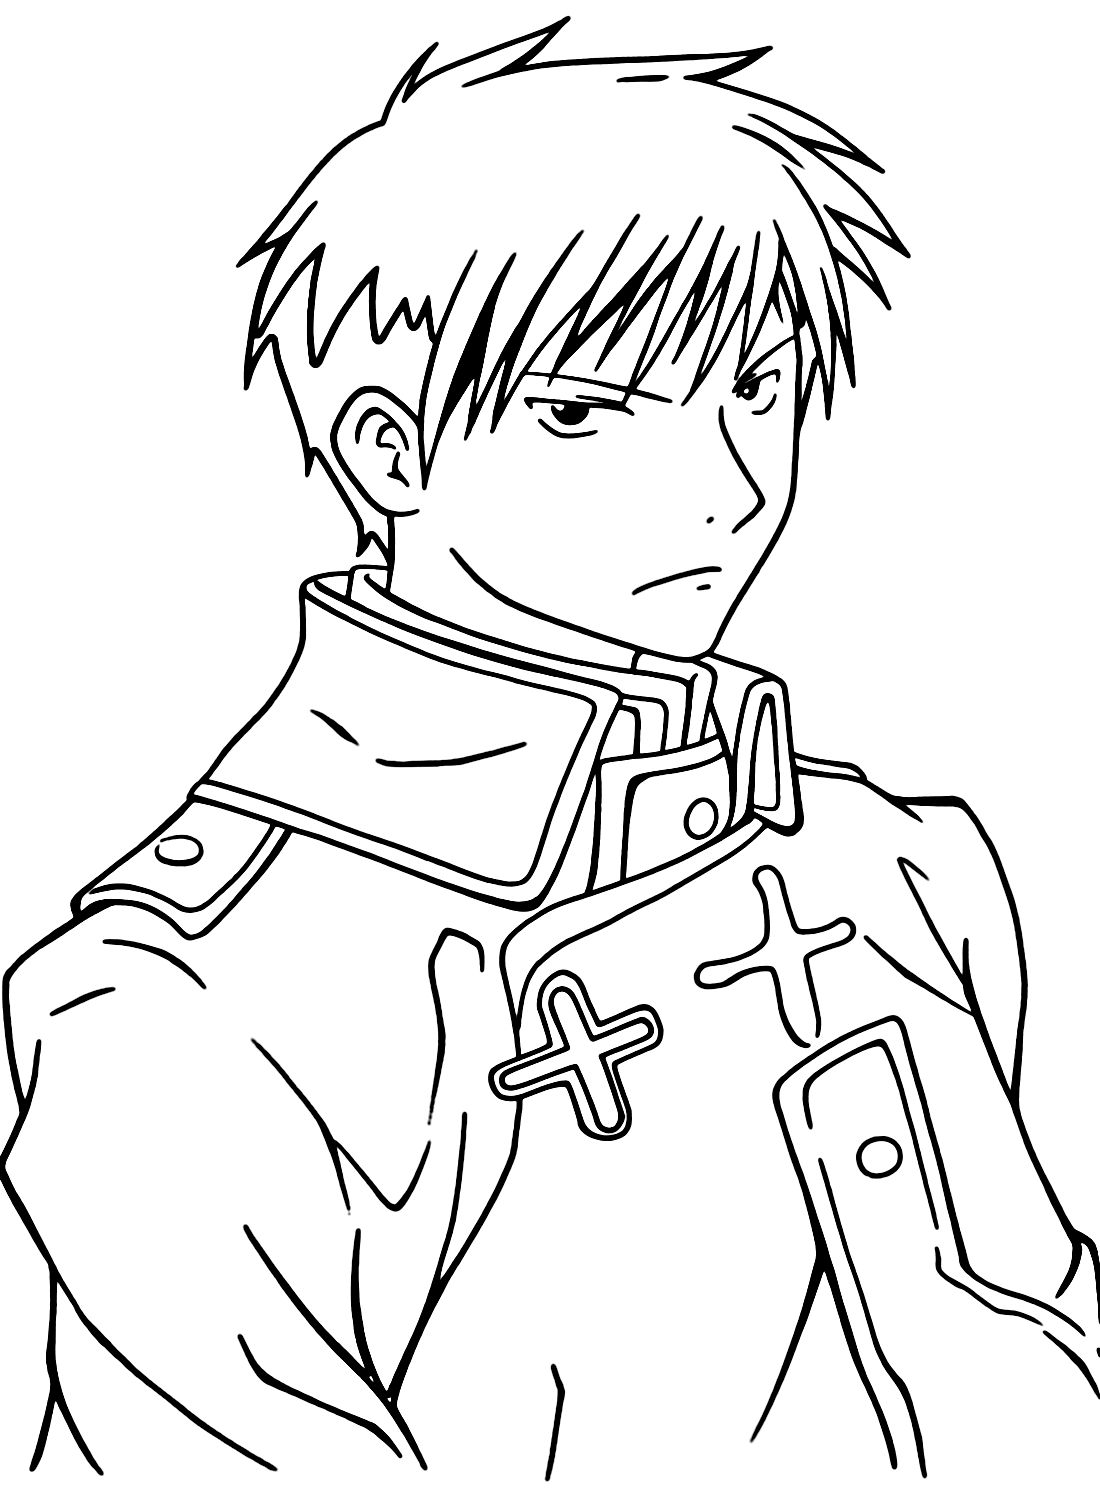 Download Roy Mustang Coloring Page from Roy Mustang